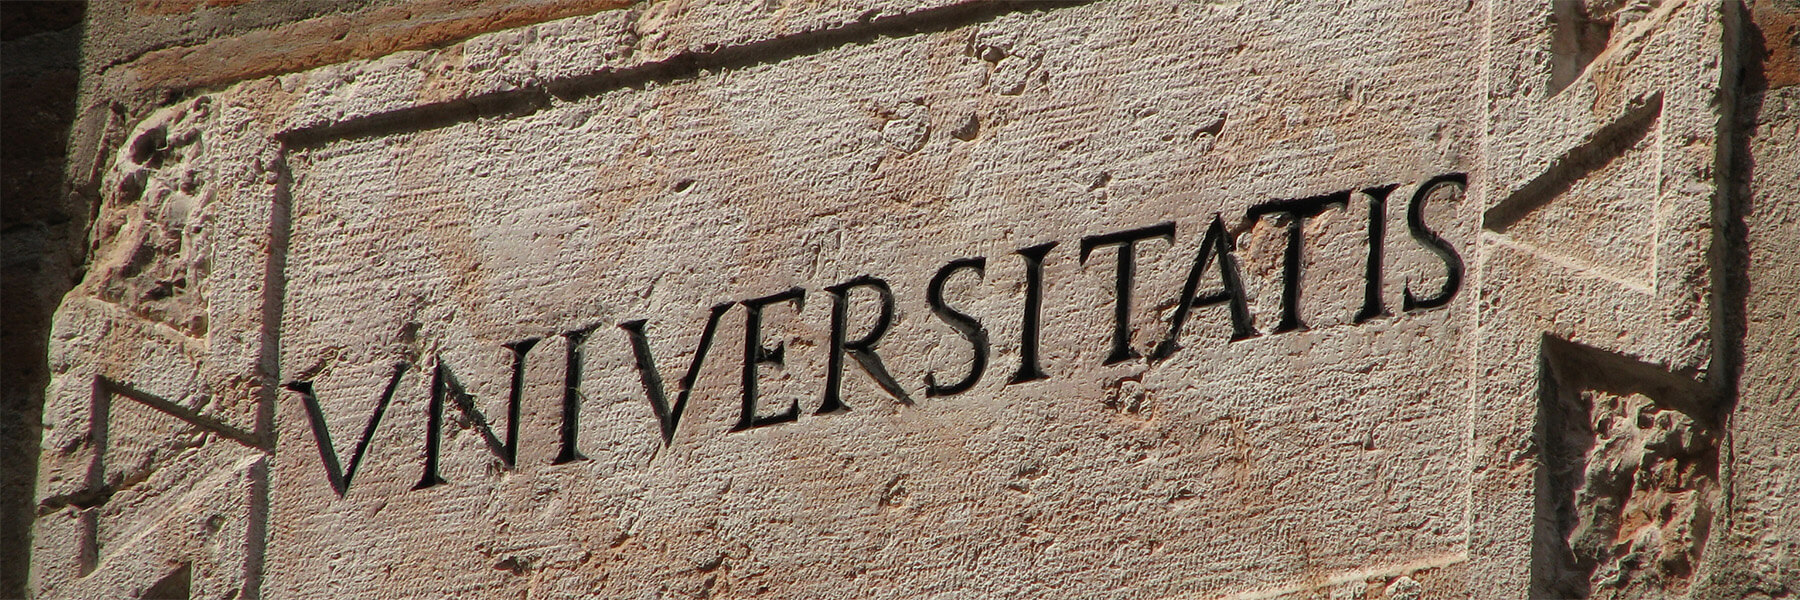 The latin word Universitatis is engraved into stone. It means University in English.